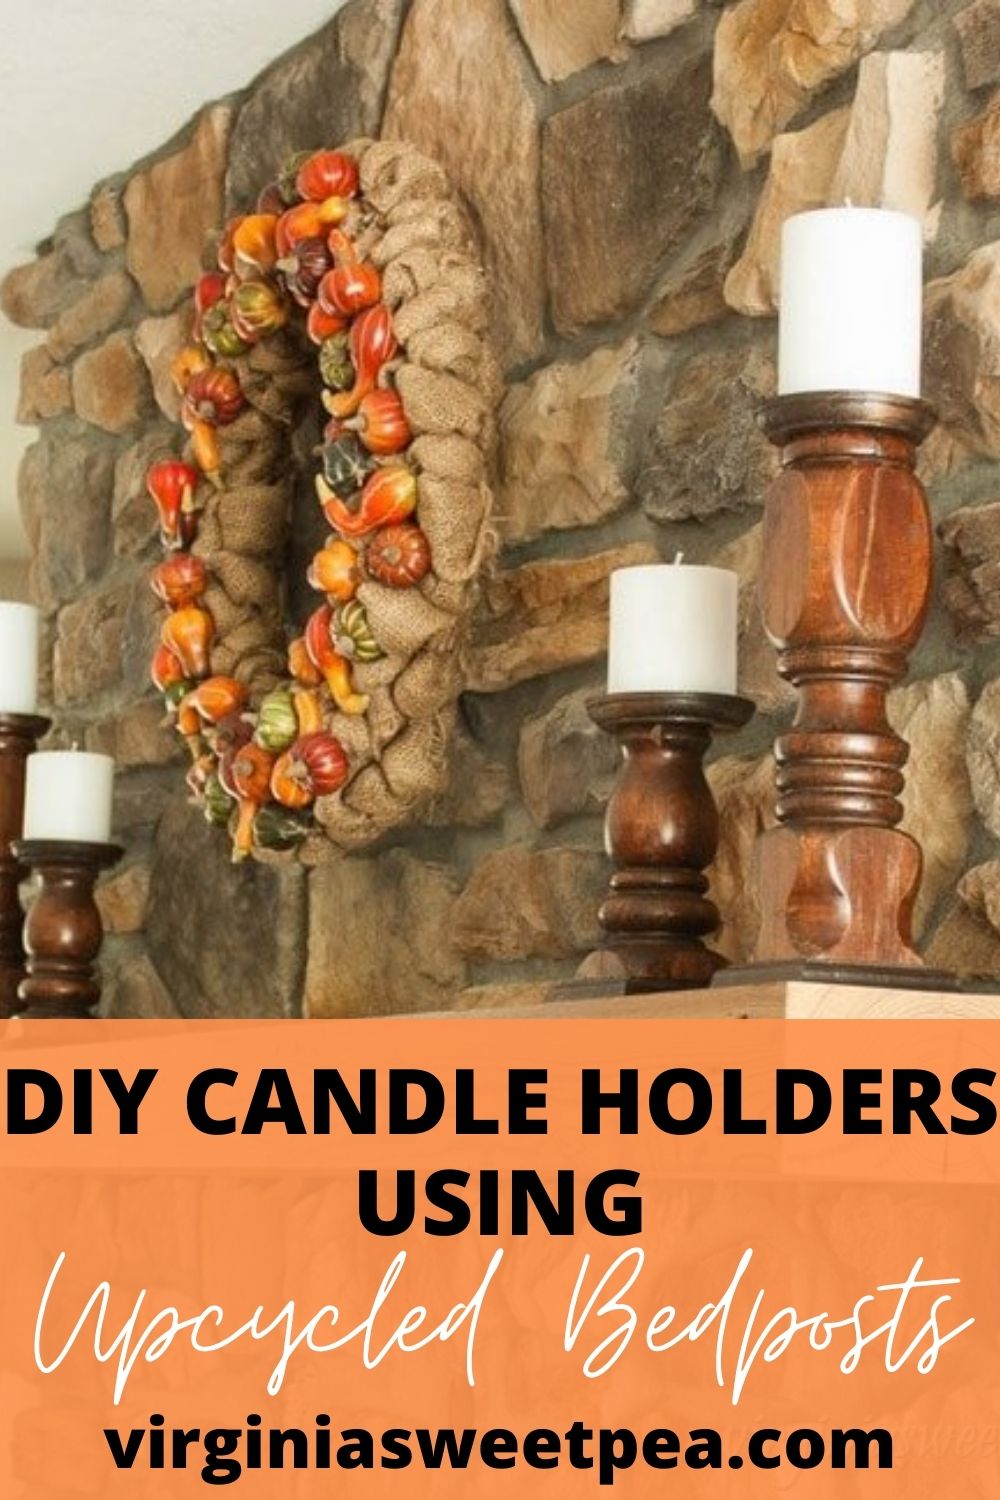 How to Make Rustic DIY Candle Holders from Old Bedposts - Noting Grace